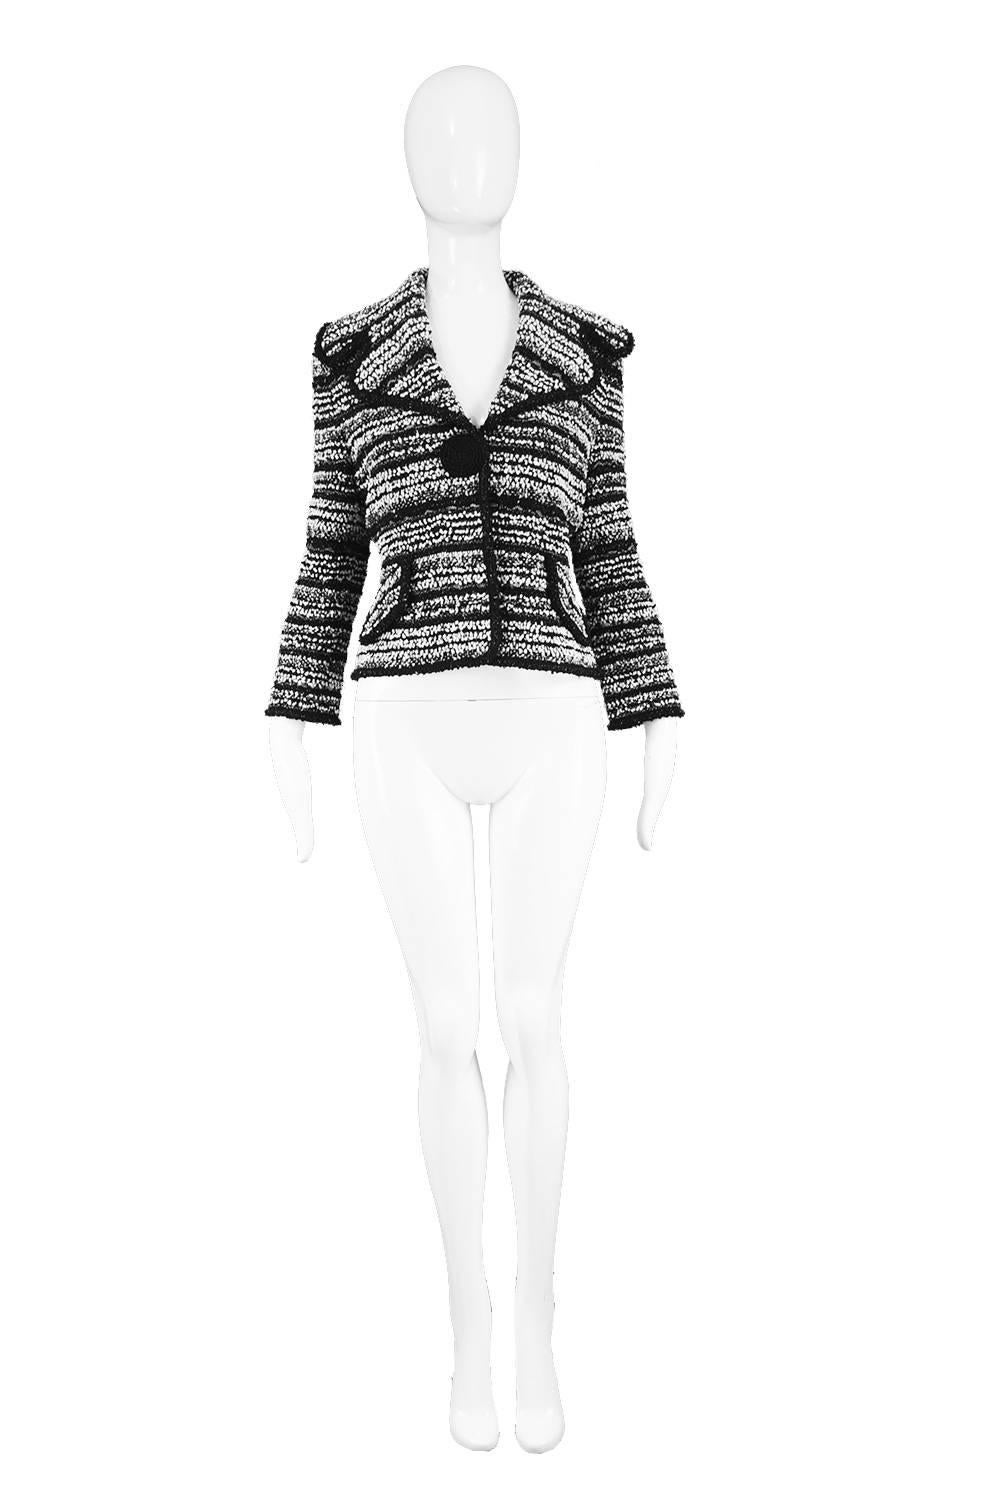 Escada Black, White & Silver Lurex Textured Knitted Boucle Tweed Blazer

Size: Marked 36 which is roughly a women’s Small but would also suit a Medium due to stretchy knit fabric. Please check measurements.
Bust - 38” / 96cm
Waist - 30” /